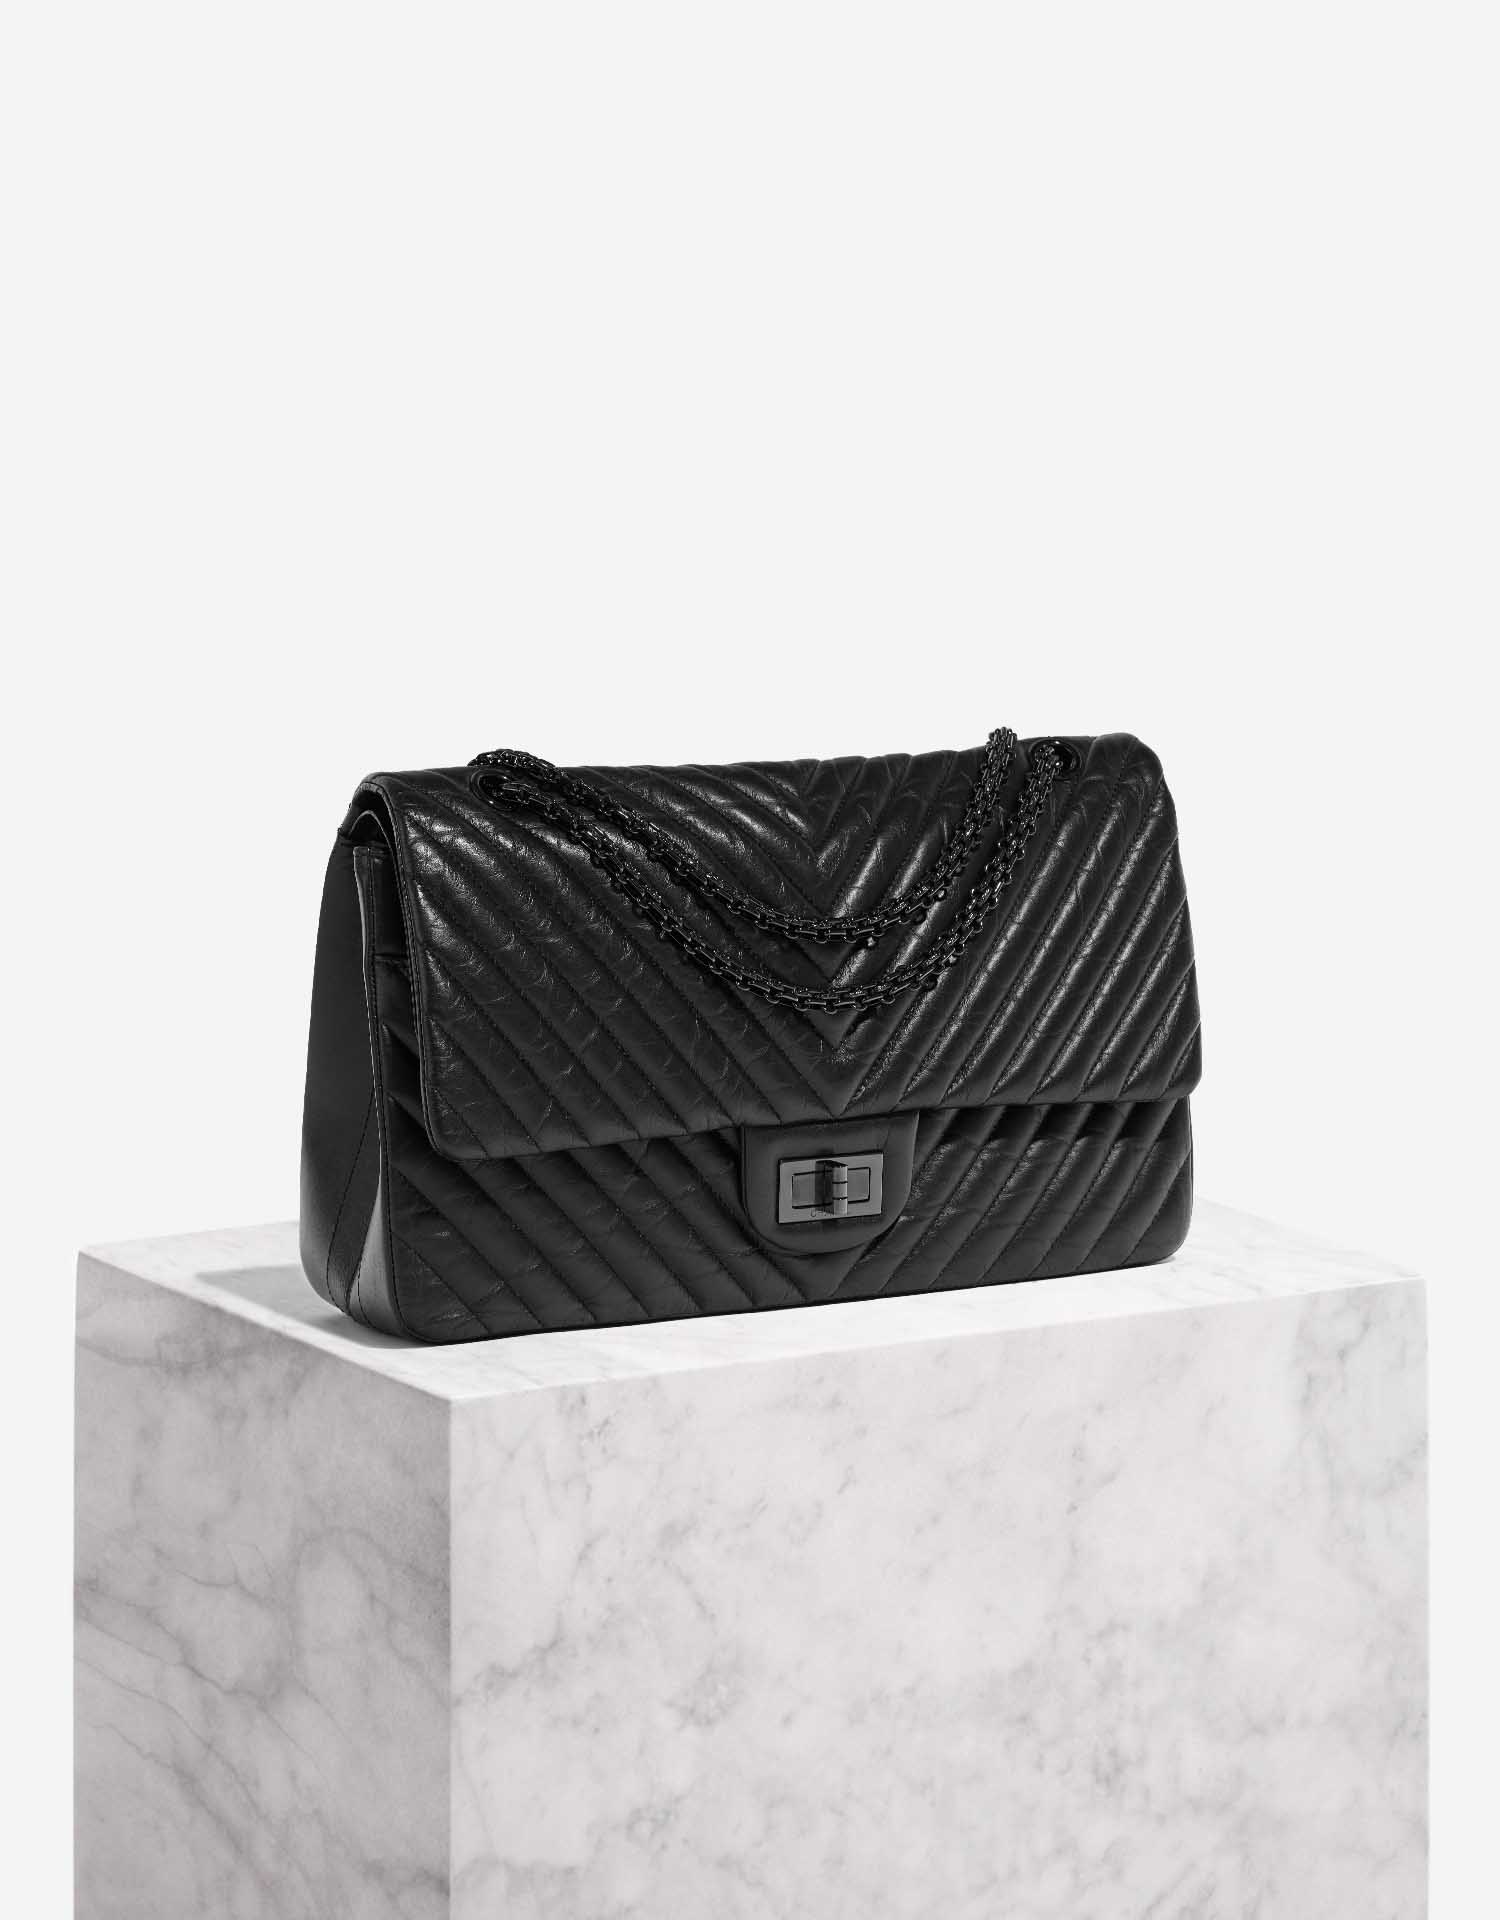 Chanel // 2009s Black Quilted 2.55 Reissue 227 Flap Bag – VSP